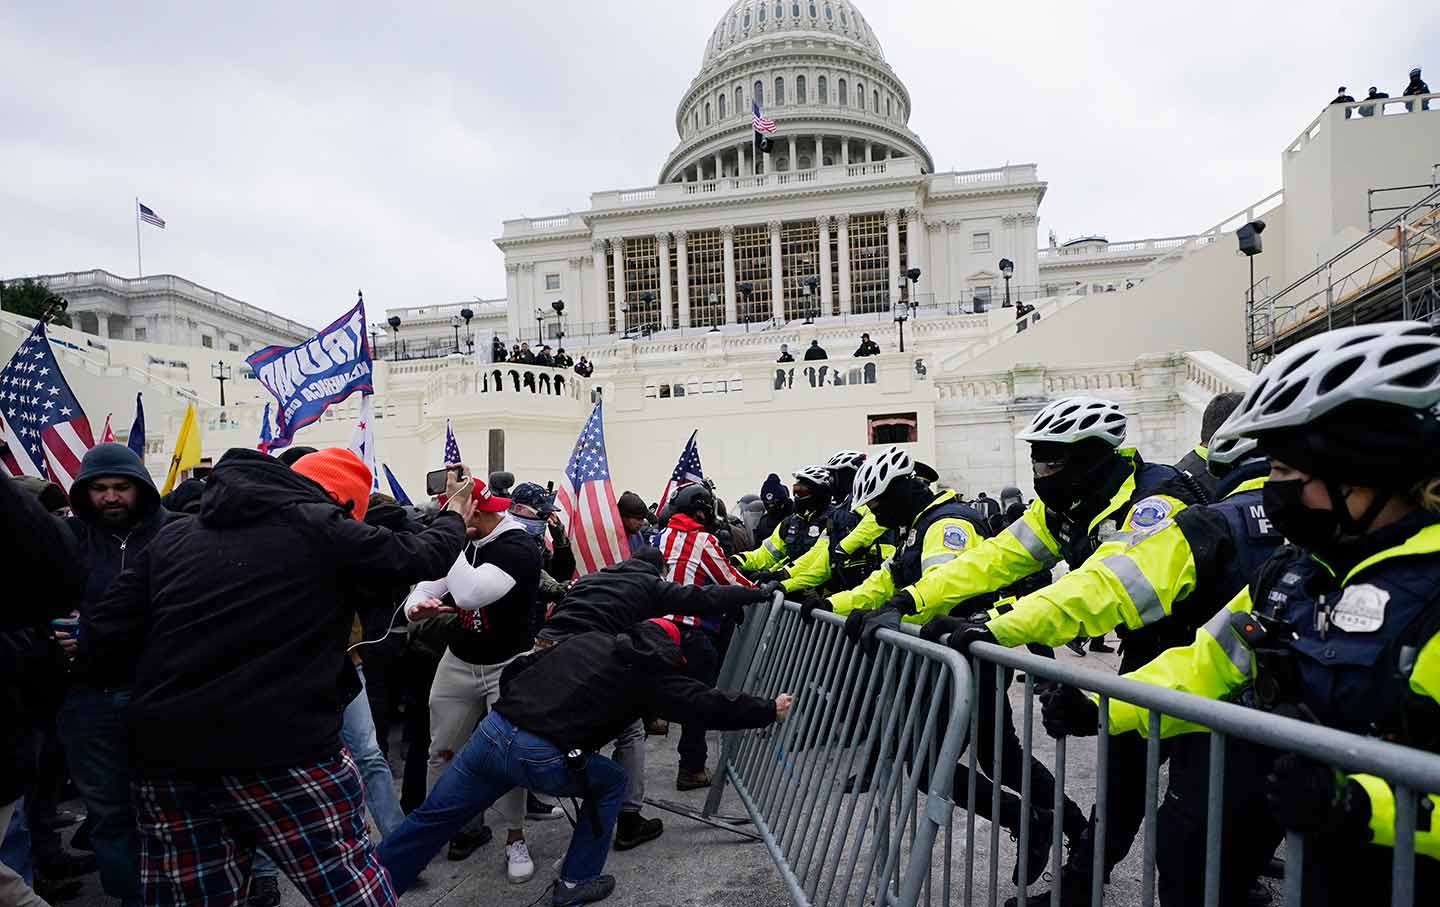 The Capitol Rioters Must Face Consequences